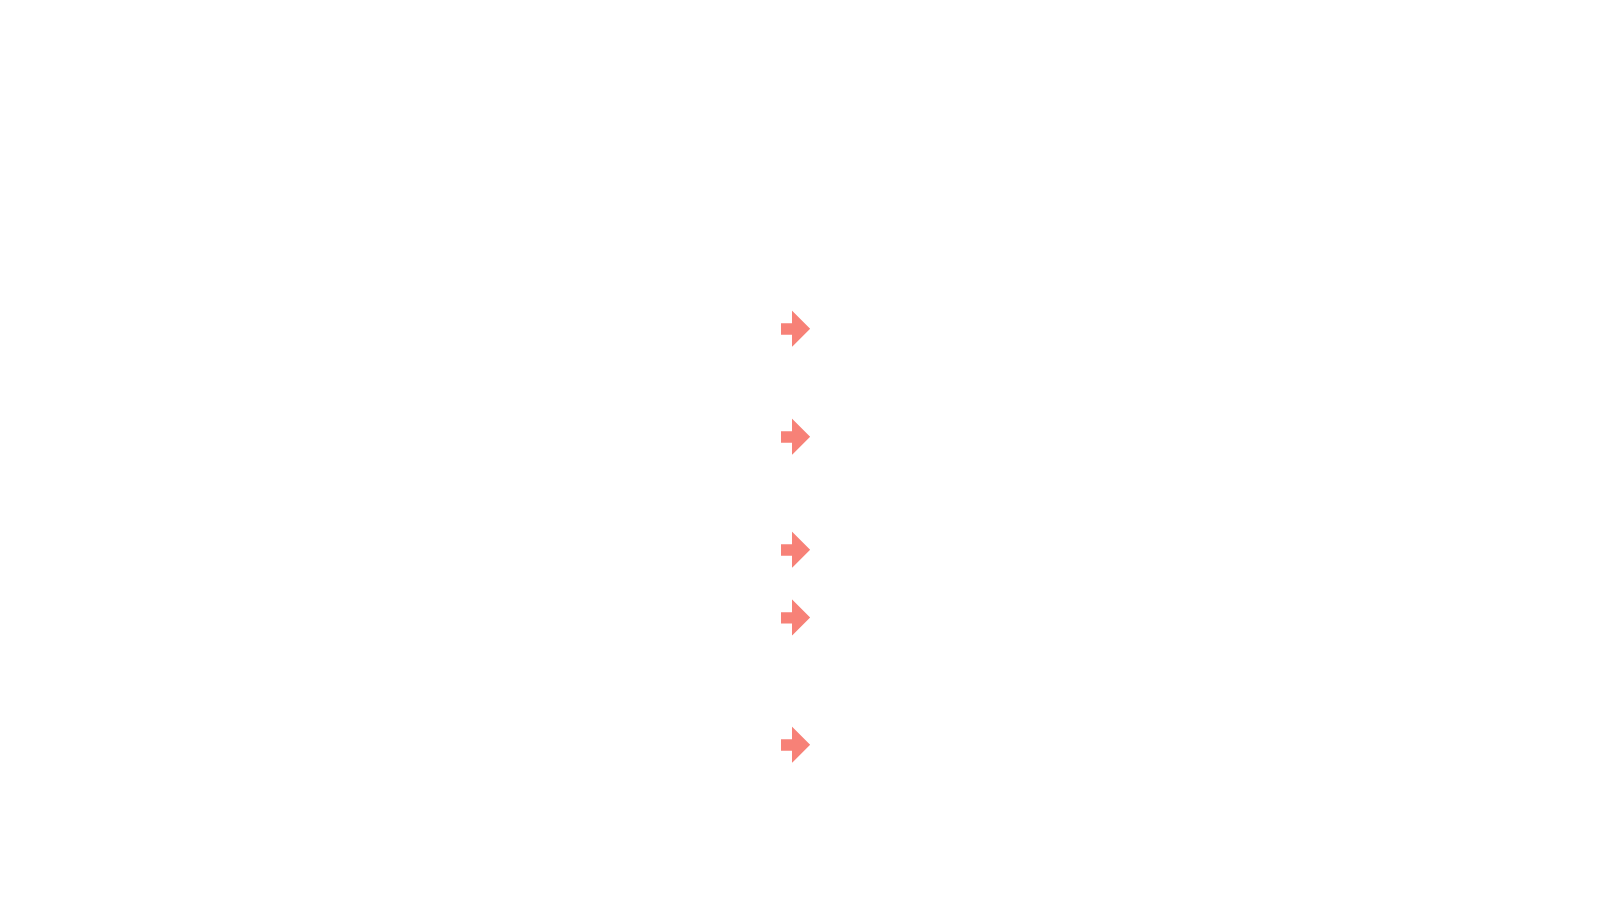 Get the most from you board_trans